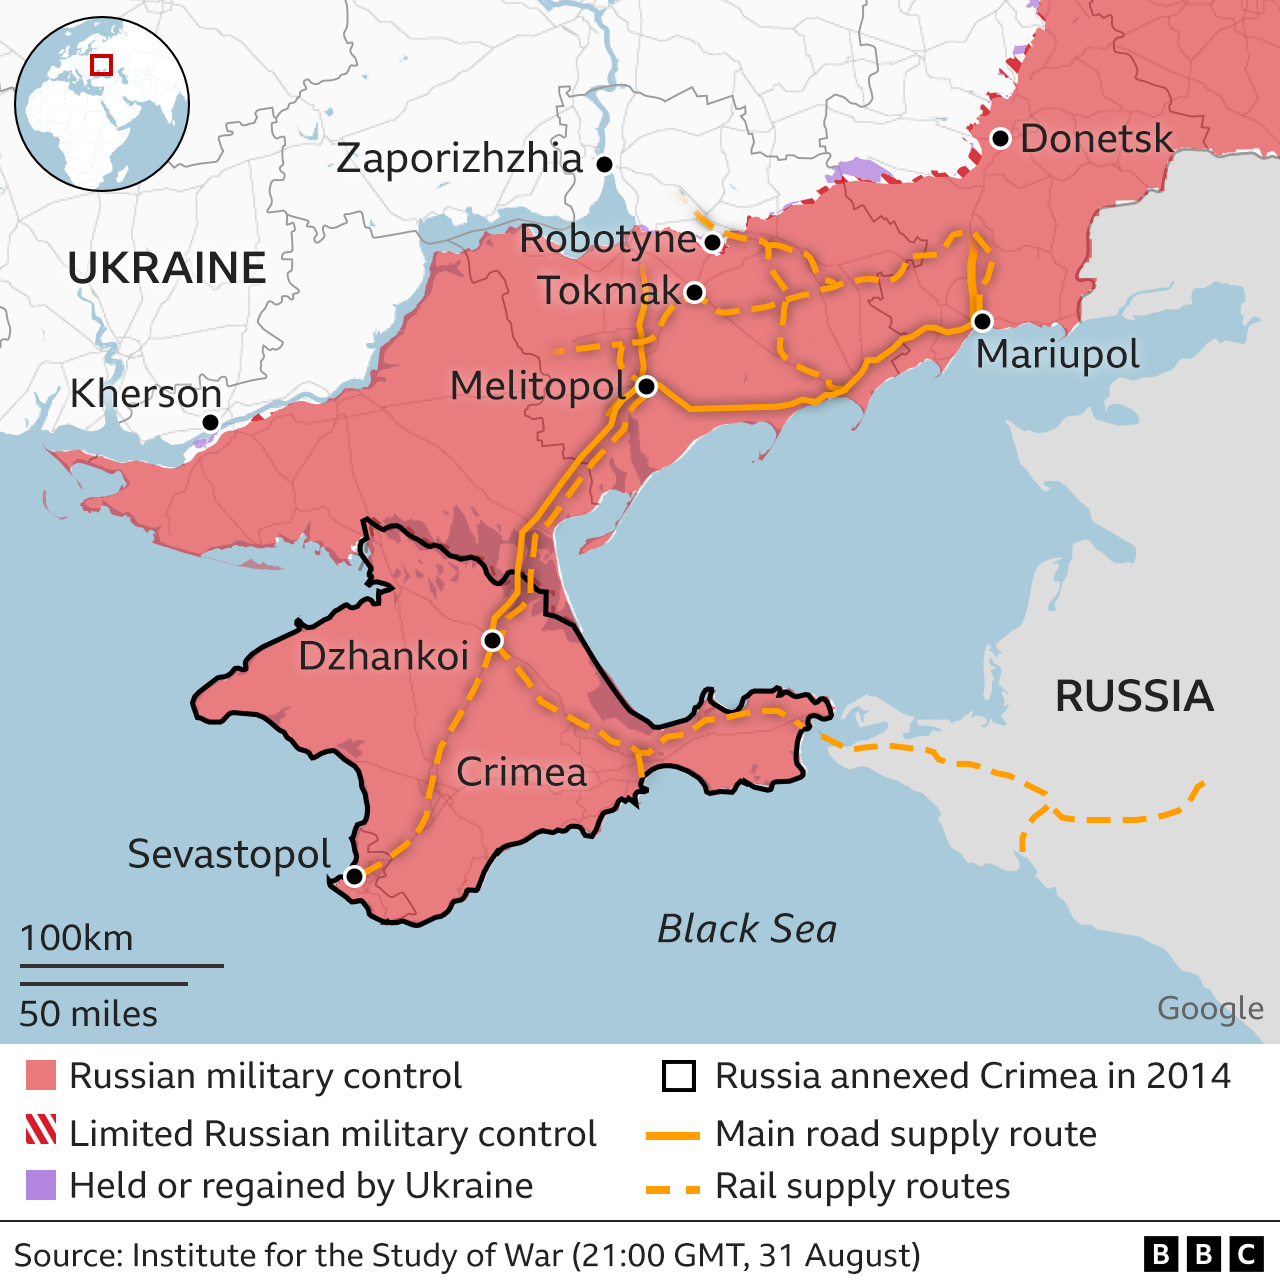 Map showing Russian military control in Ukraine